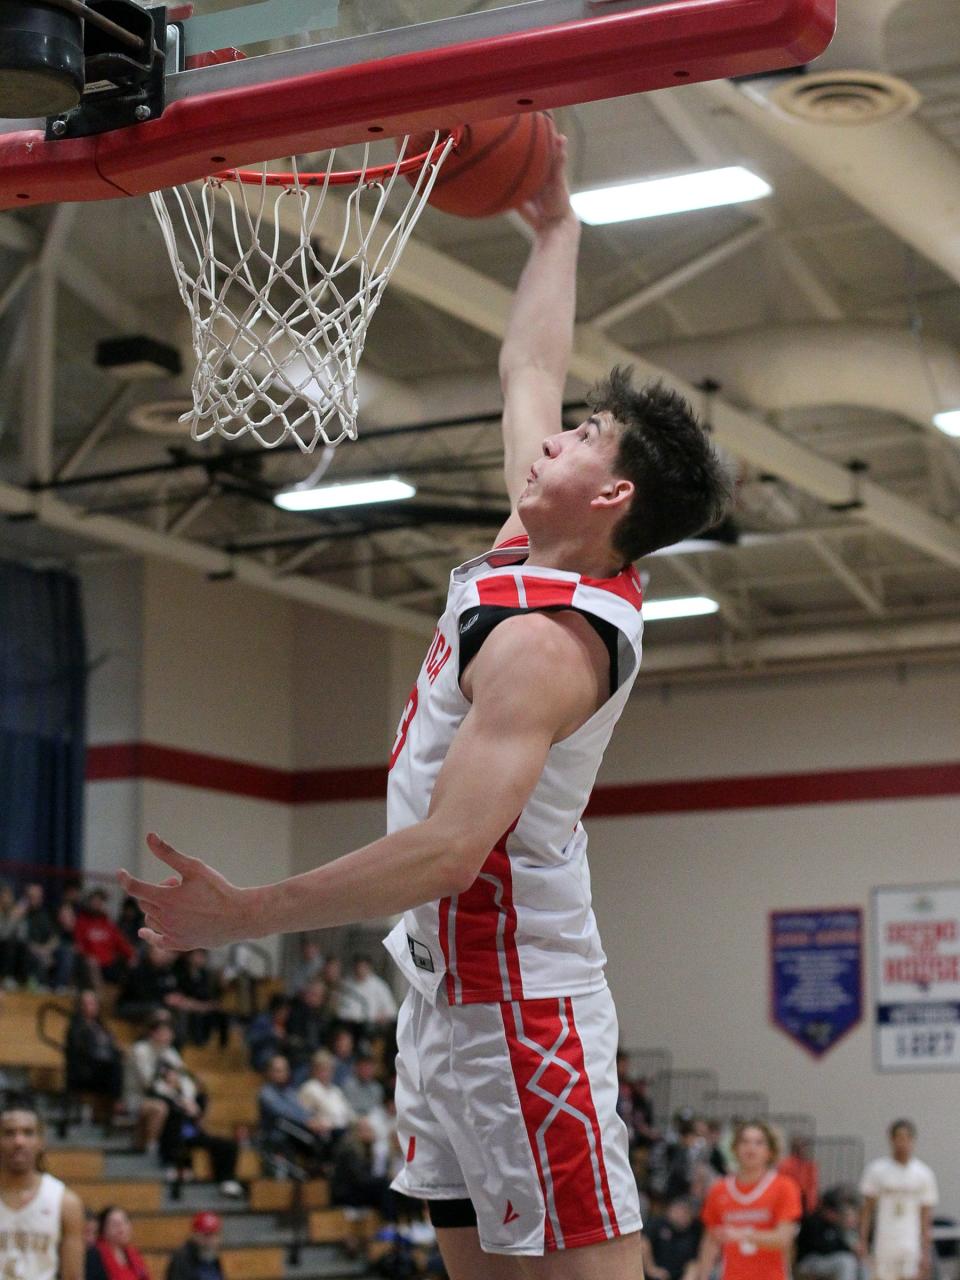 Utica senior Trenton Collins dunks during the Licking-Muskingum All-Star Game Sunday at Licking Valley High School.